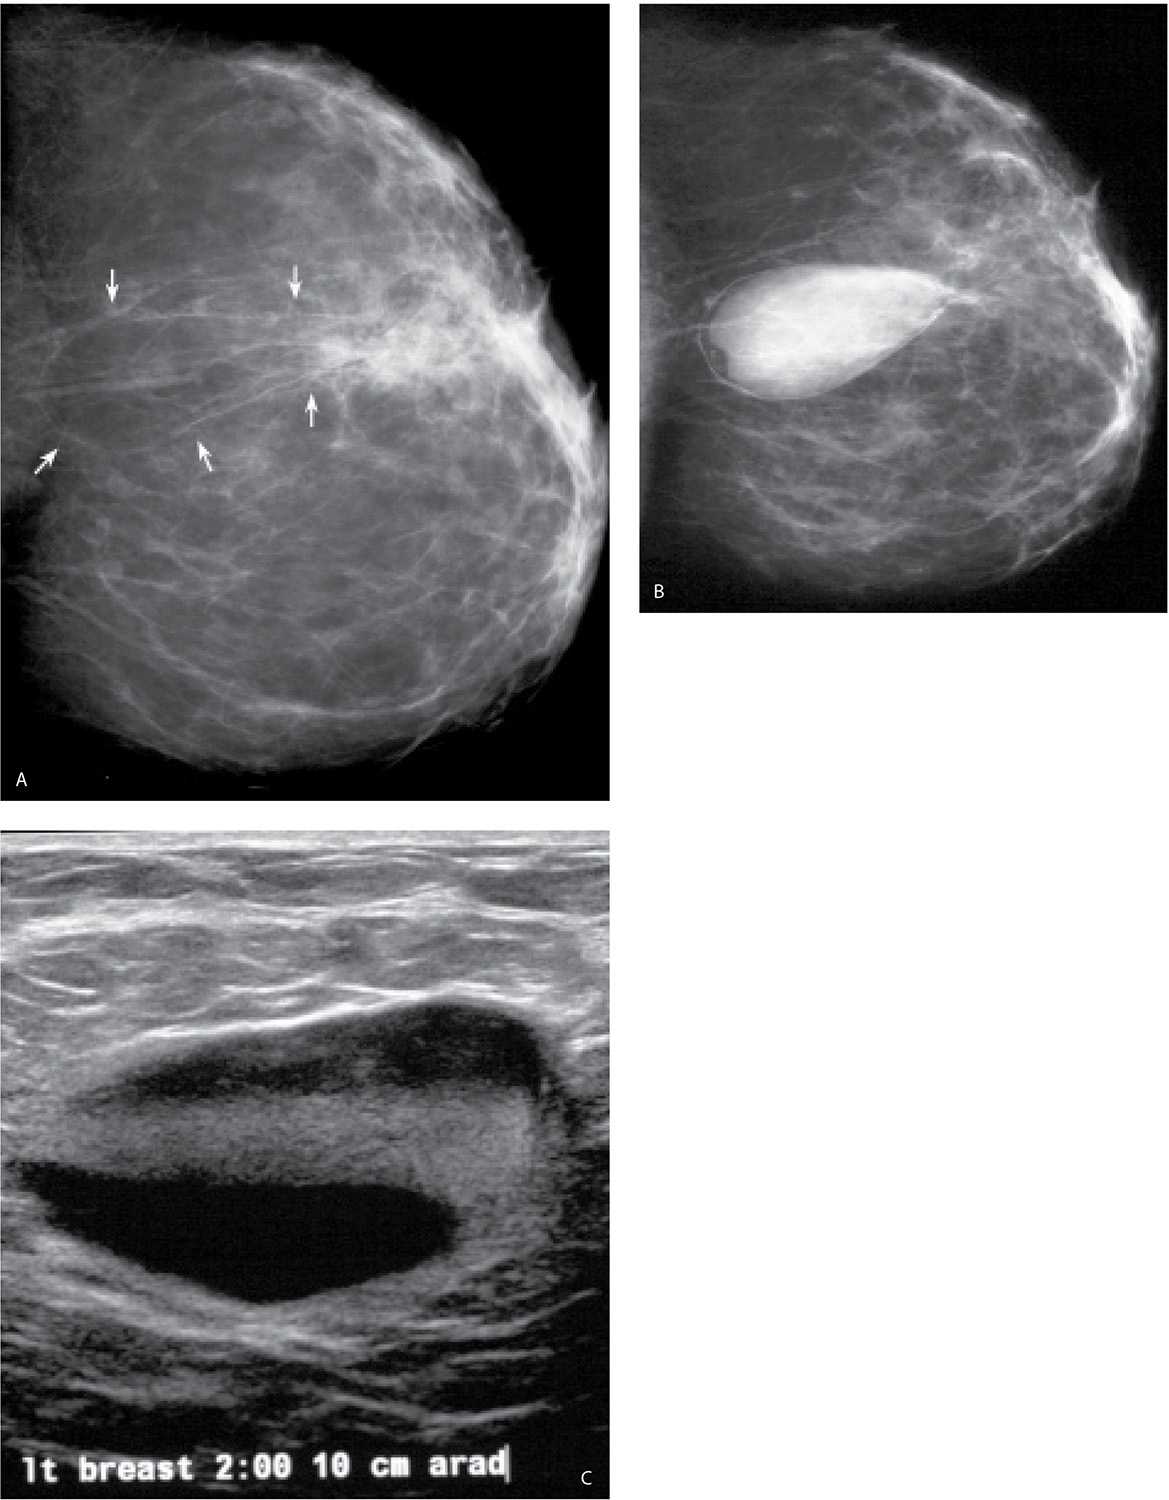 b. Left breast USG showing oval, well-defined, mixed echogenic